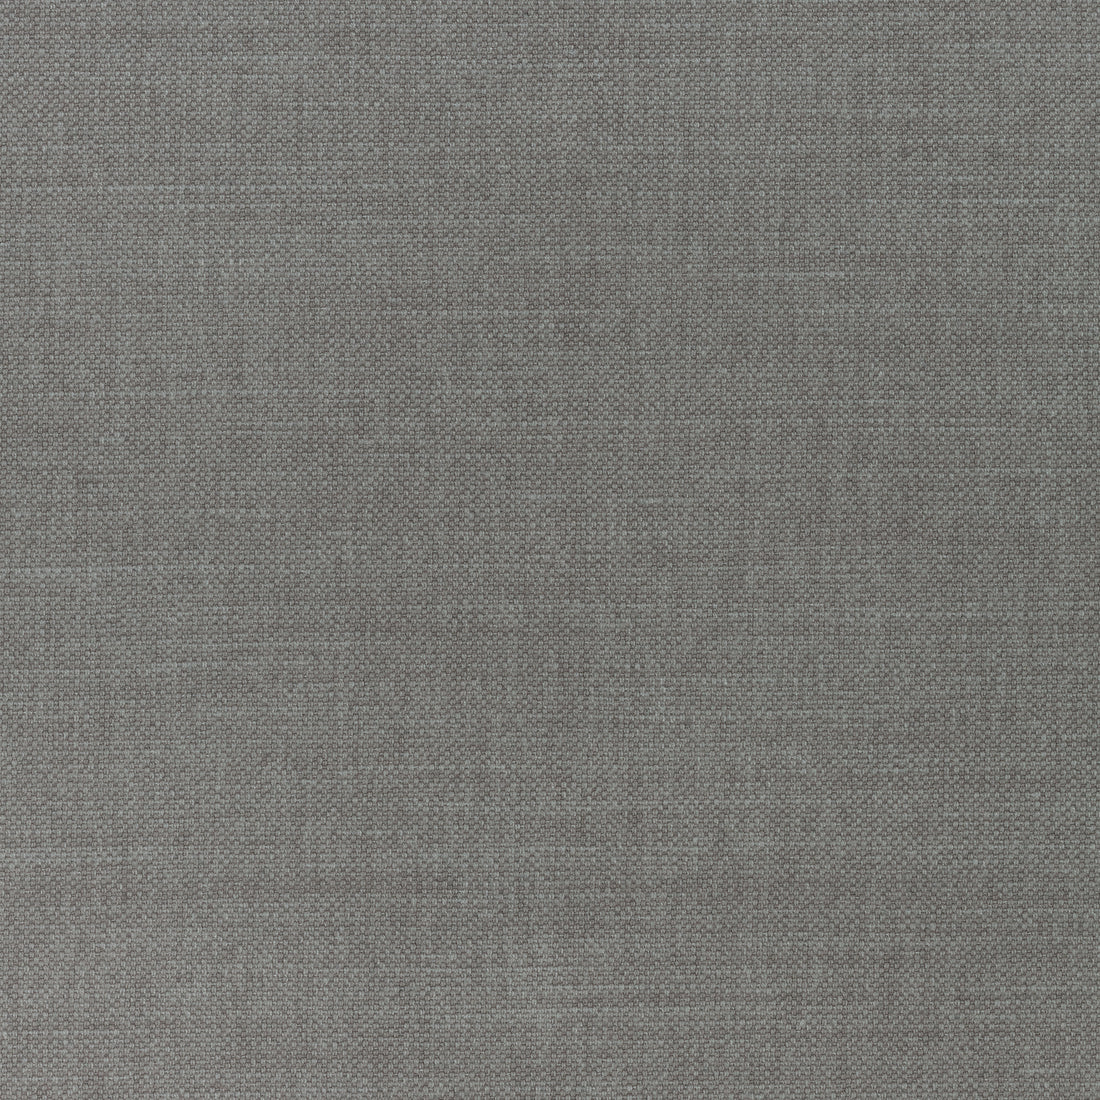 Prisma fabric in flannel color - pattern number W70116 - by Thibaut in the Woven Resource Vol 12 Prisma Fabrics collection